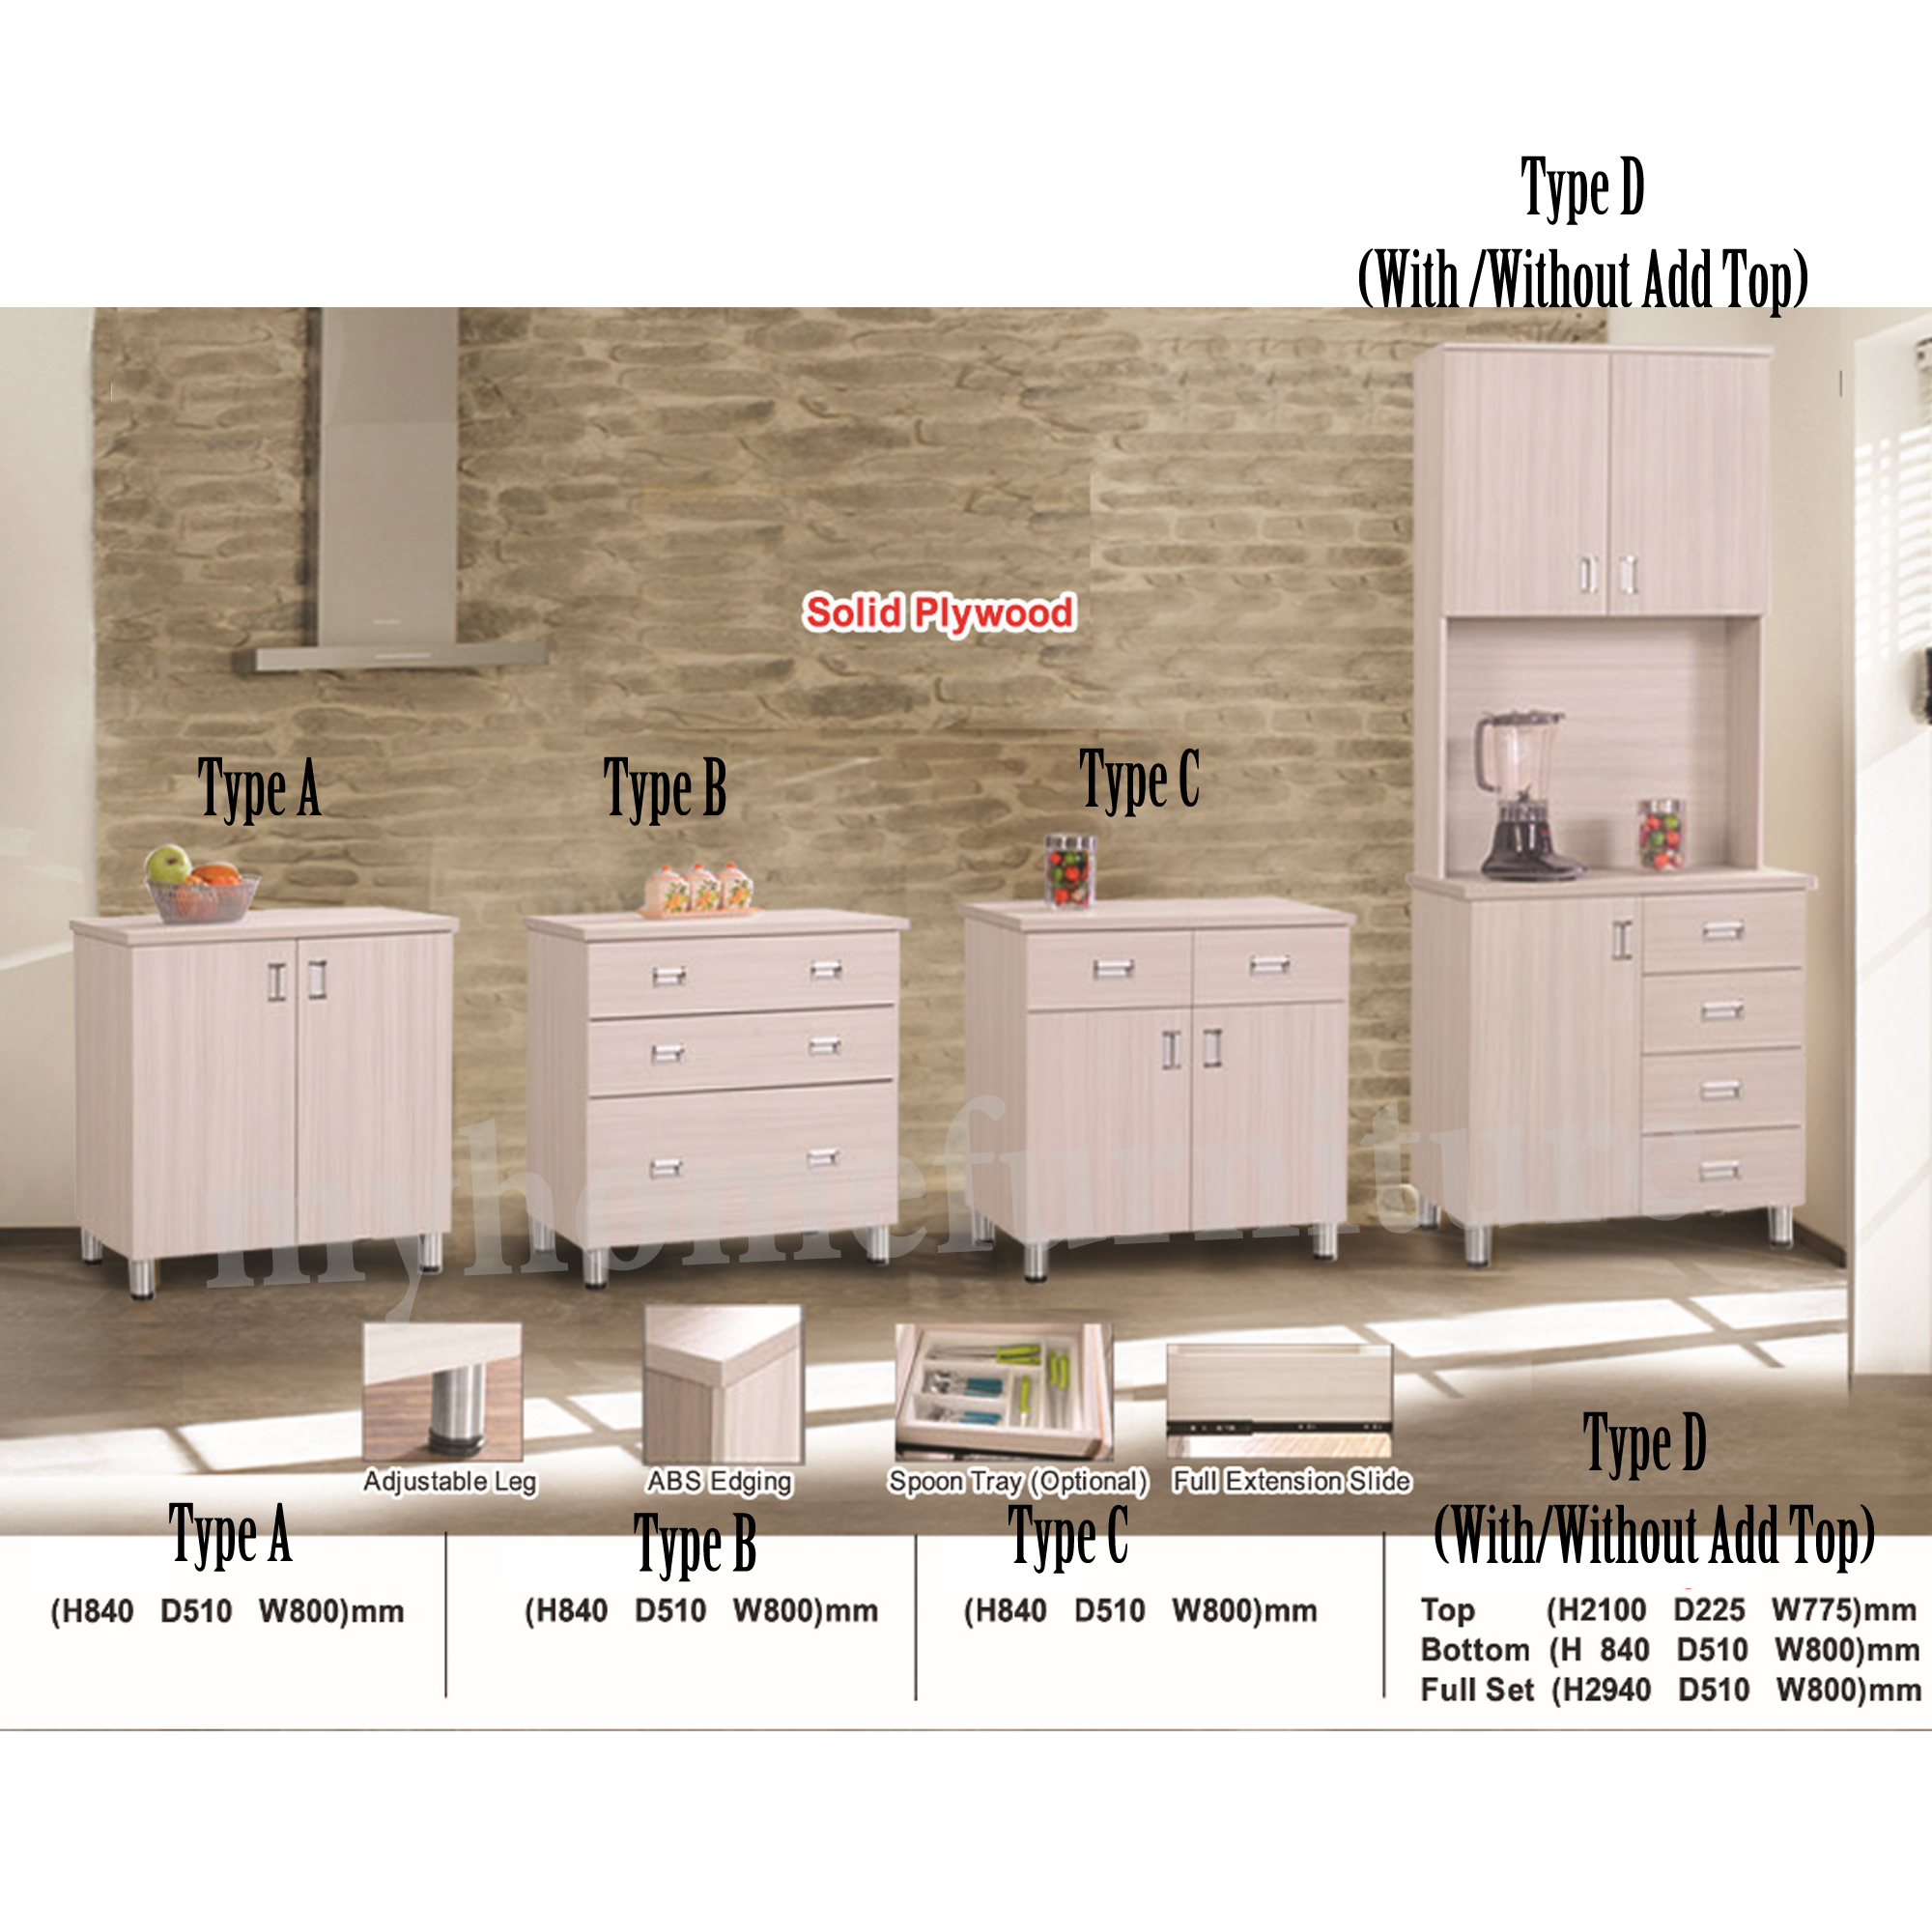 Albe Kitchen Cabinet 100 Solid Plywood Free Installation And